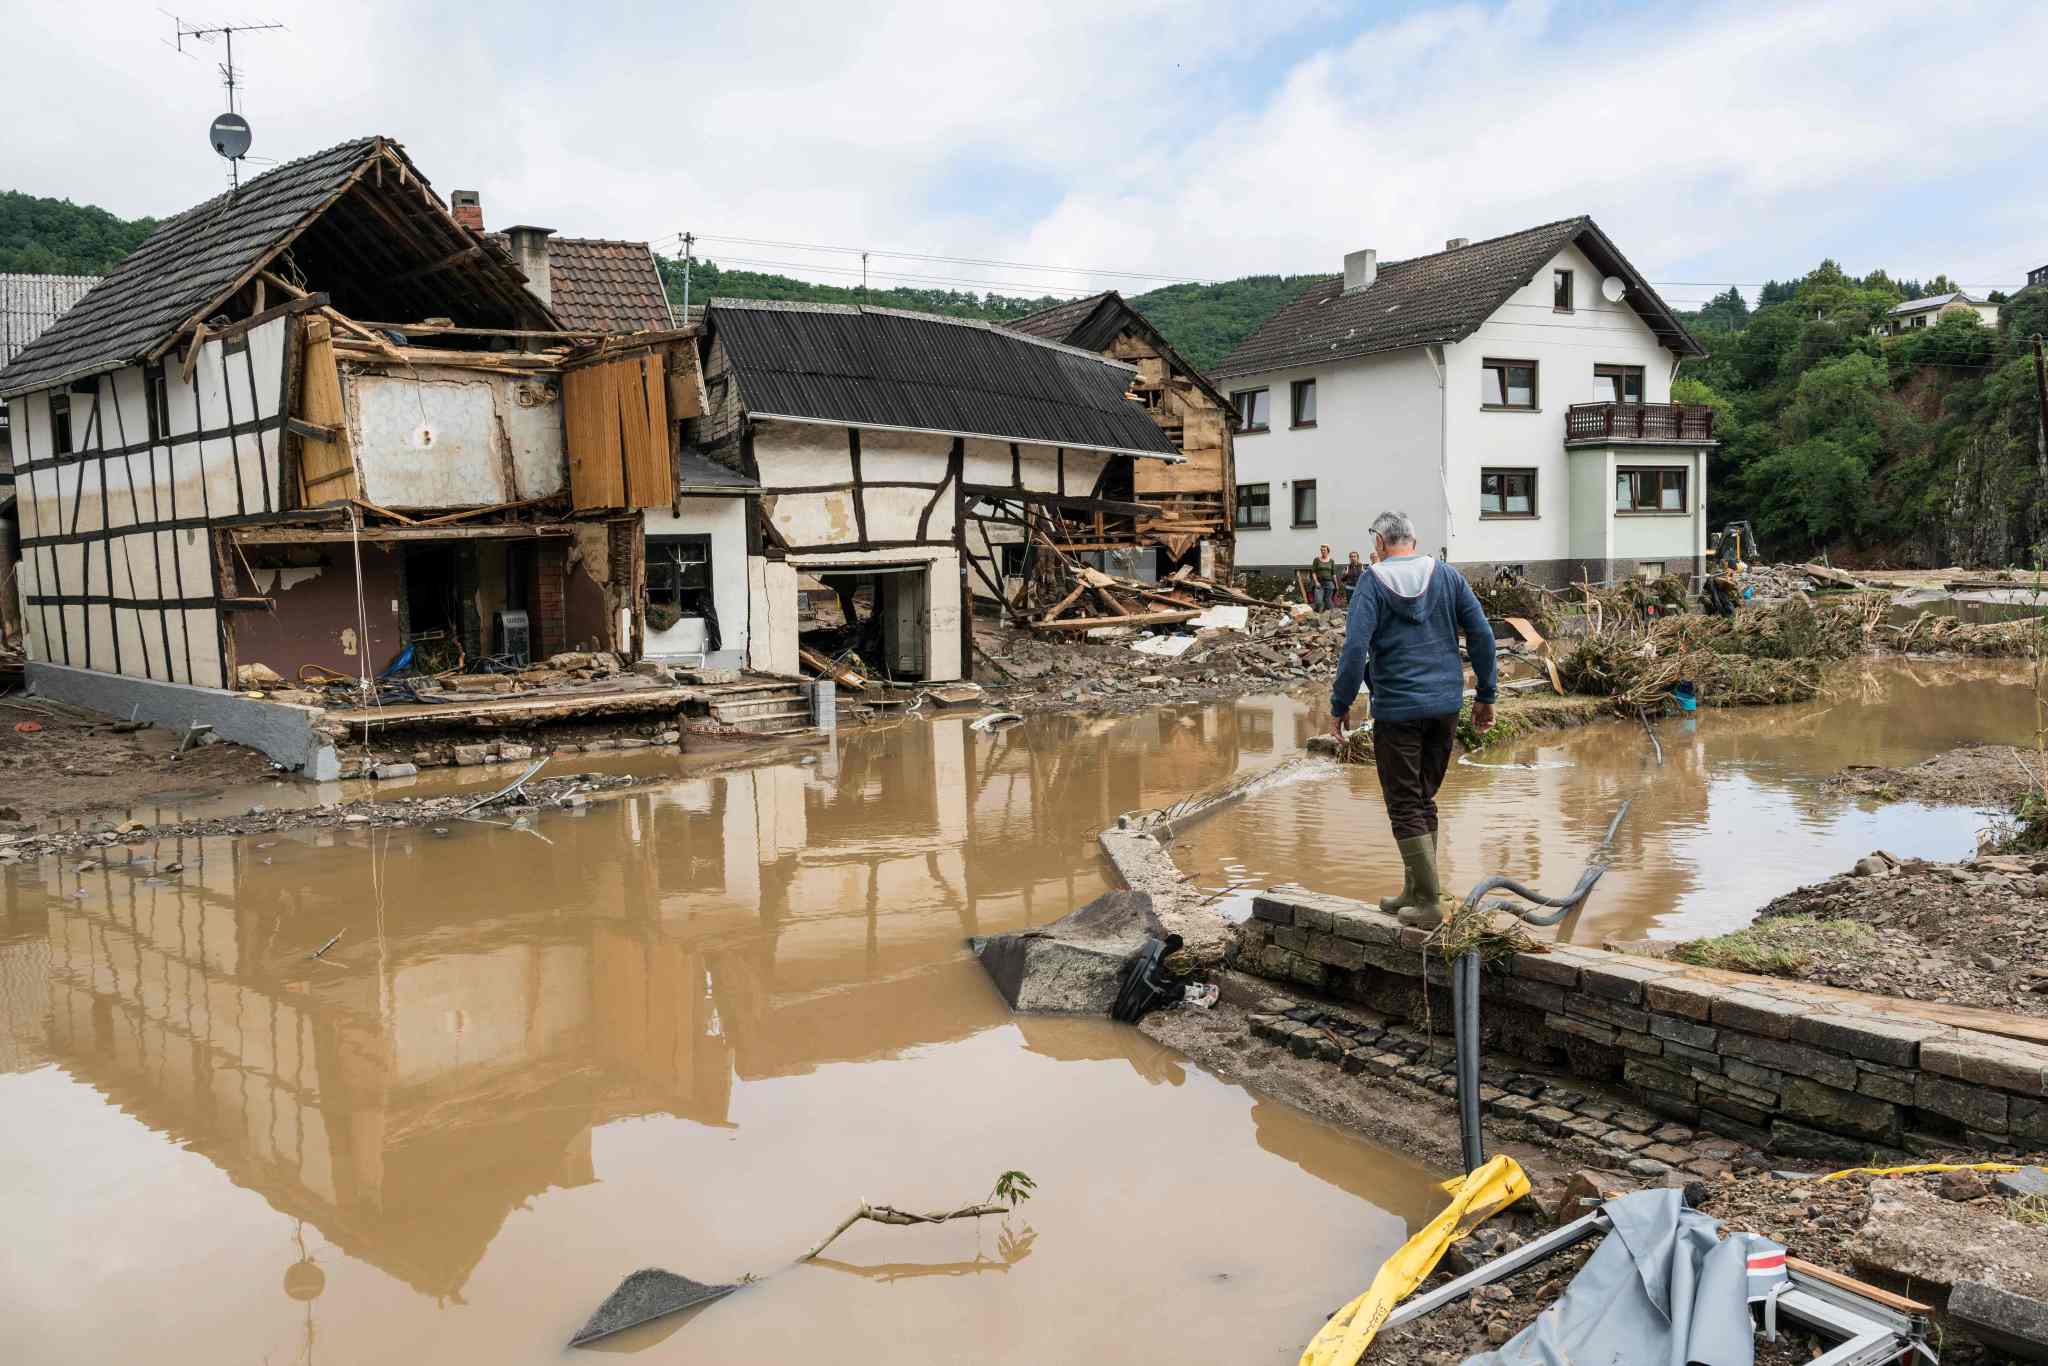 A man walks through the floods towards destroyed houses in Schuld near Bad Neuenahr, western Germany, on July 15, 2021.